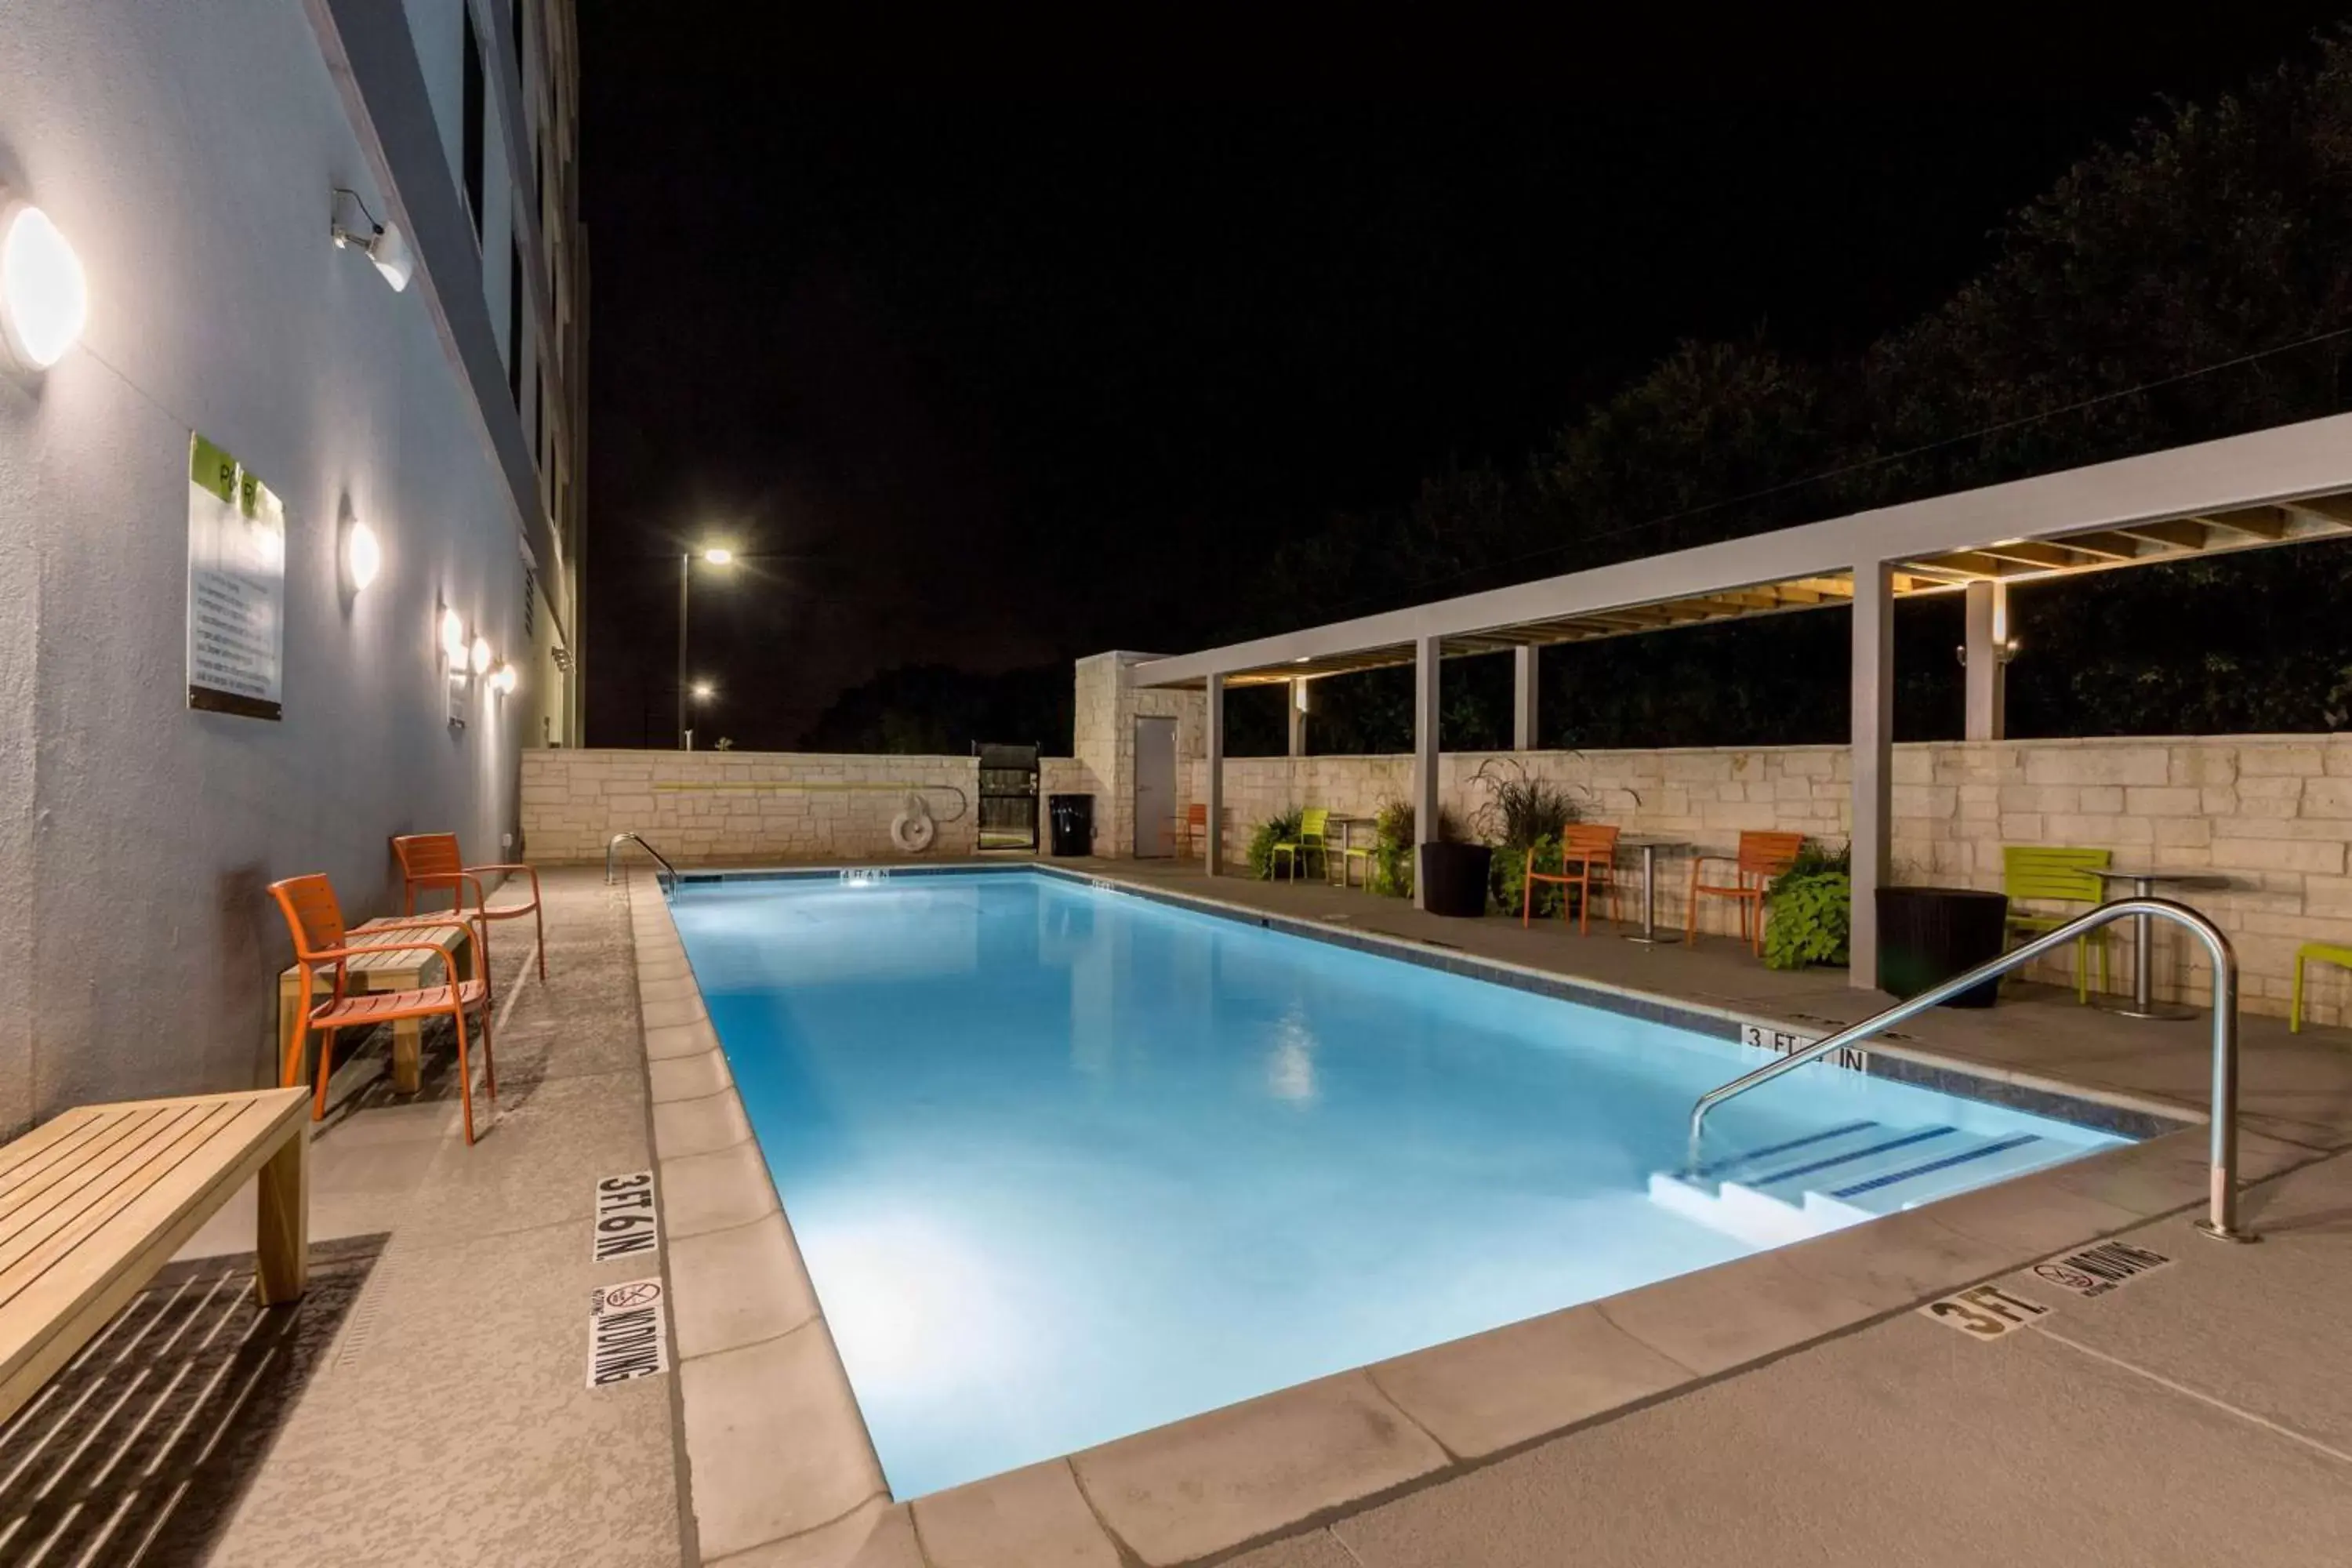 Swimming Pool in Home2 Suites By Hilton Fort Worth Northlake